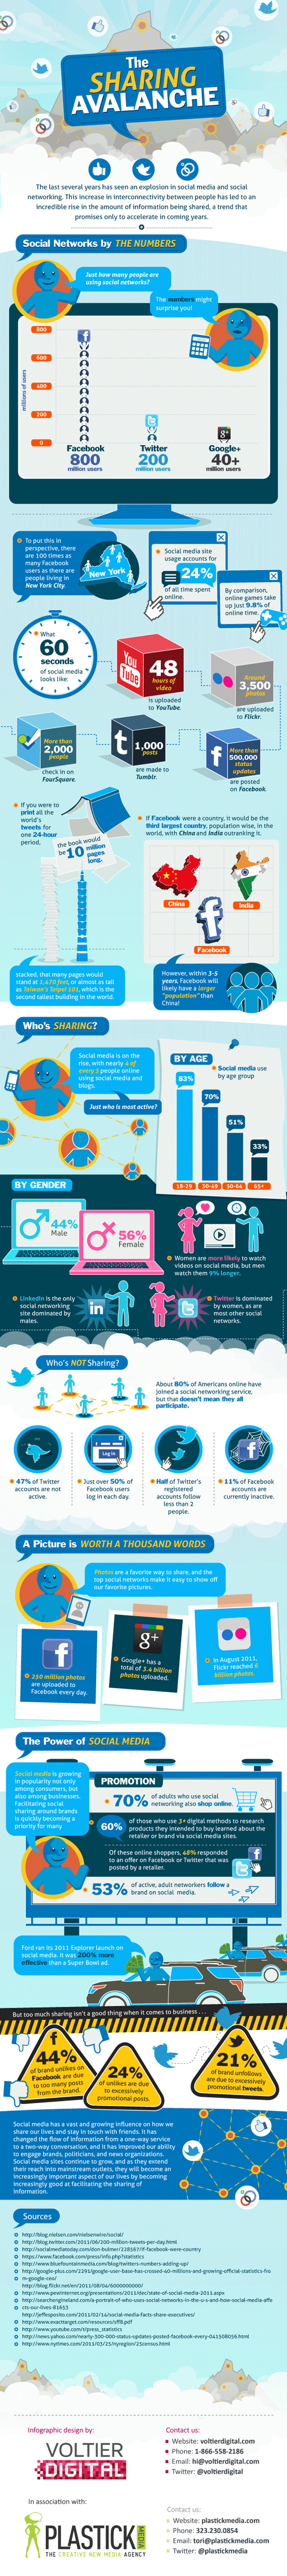 How We Share In Social Media [INFOGRAPHIC]